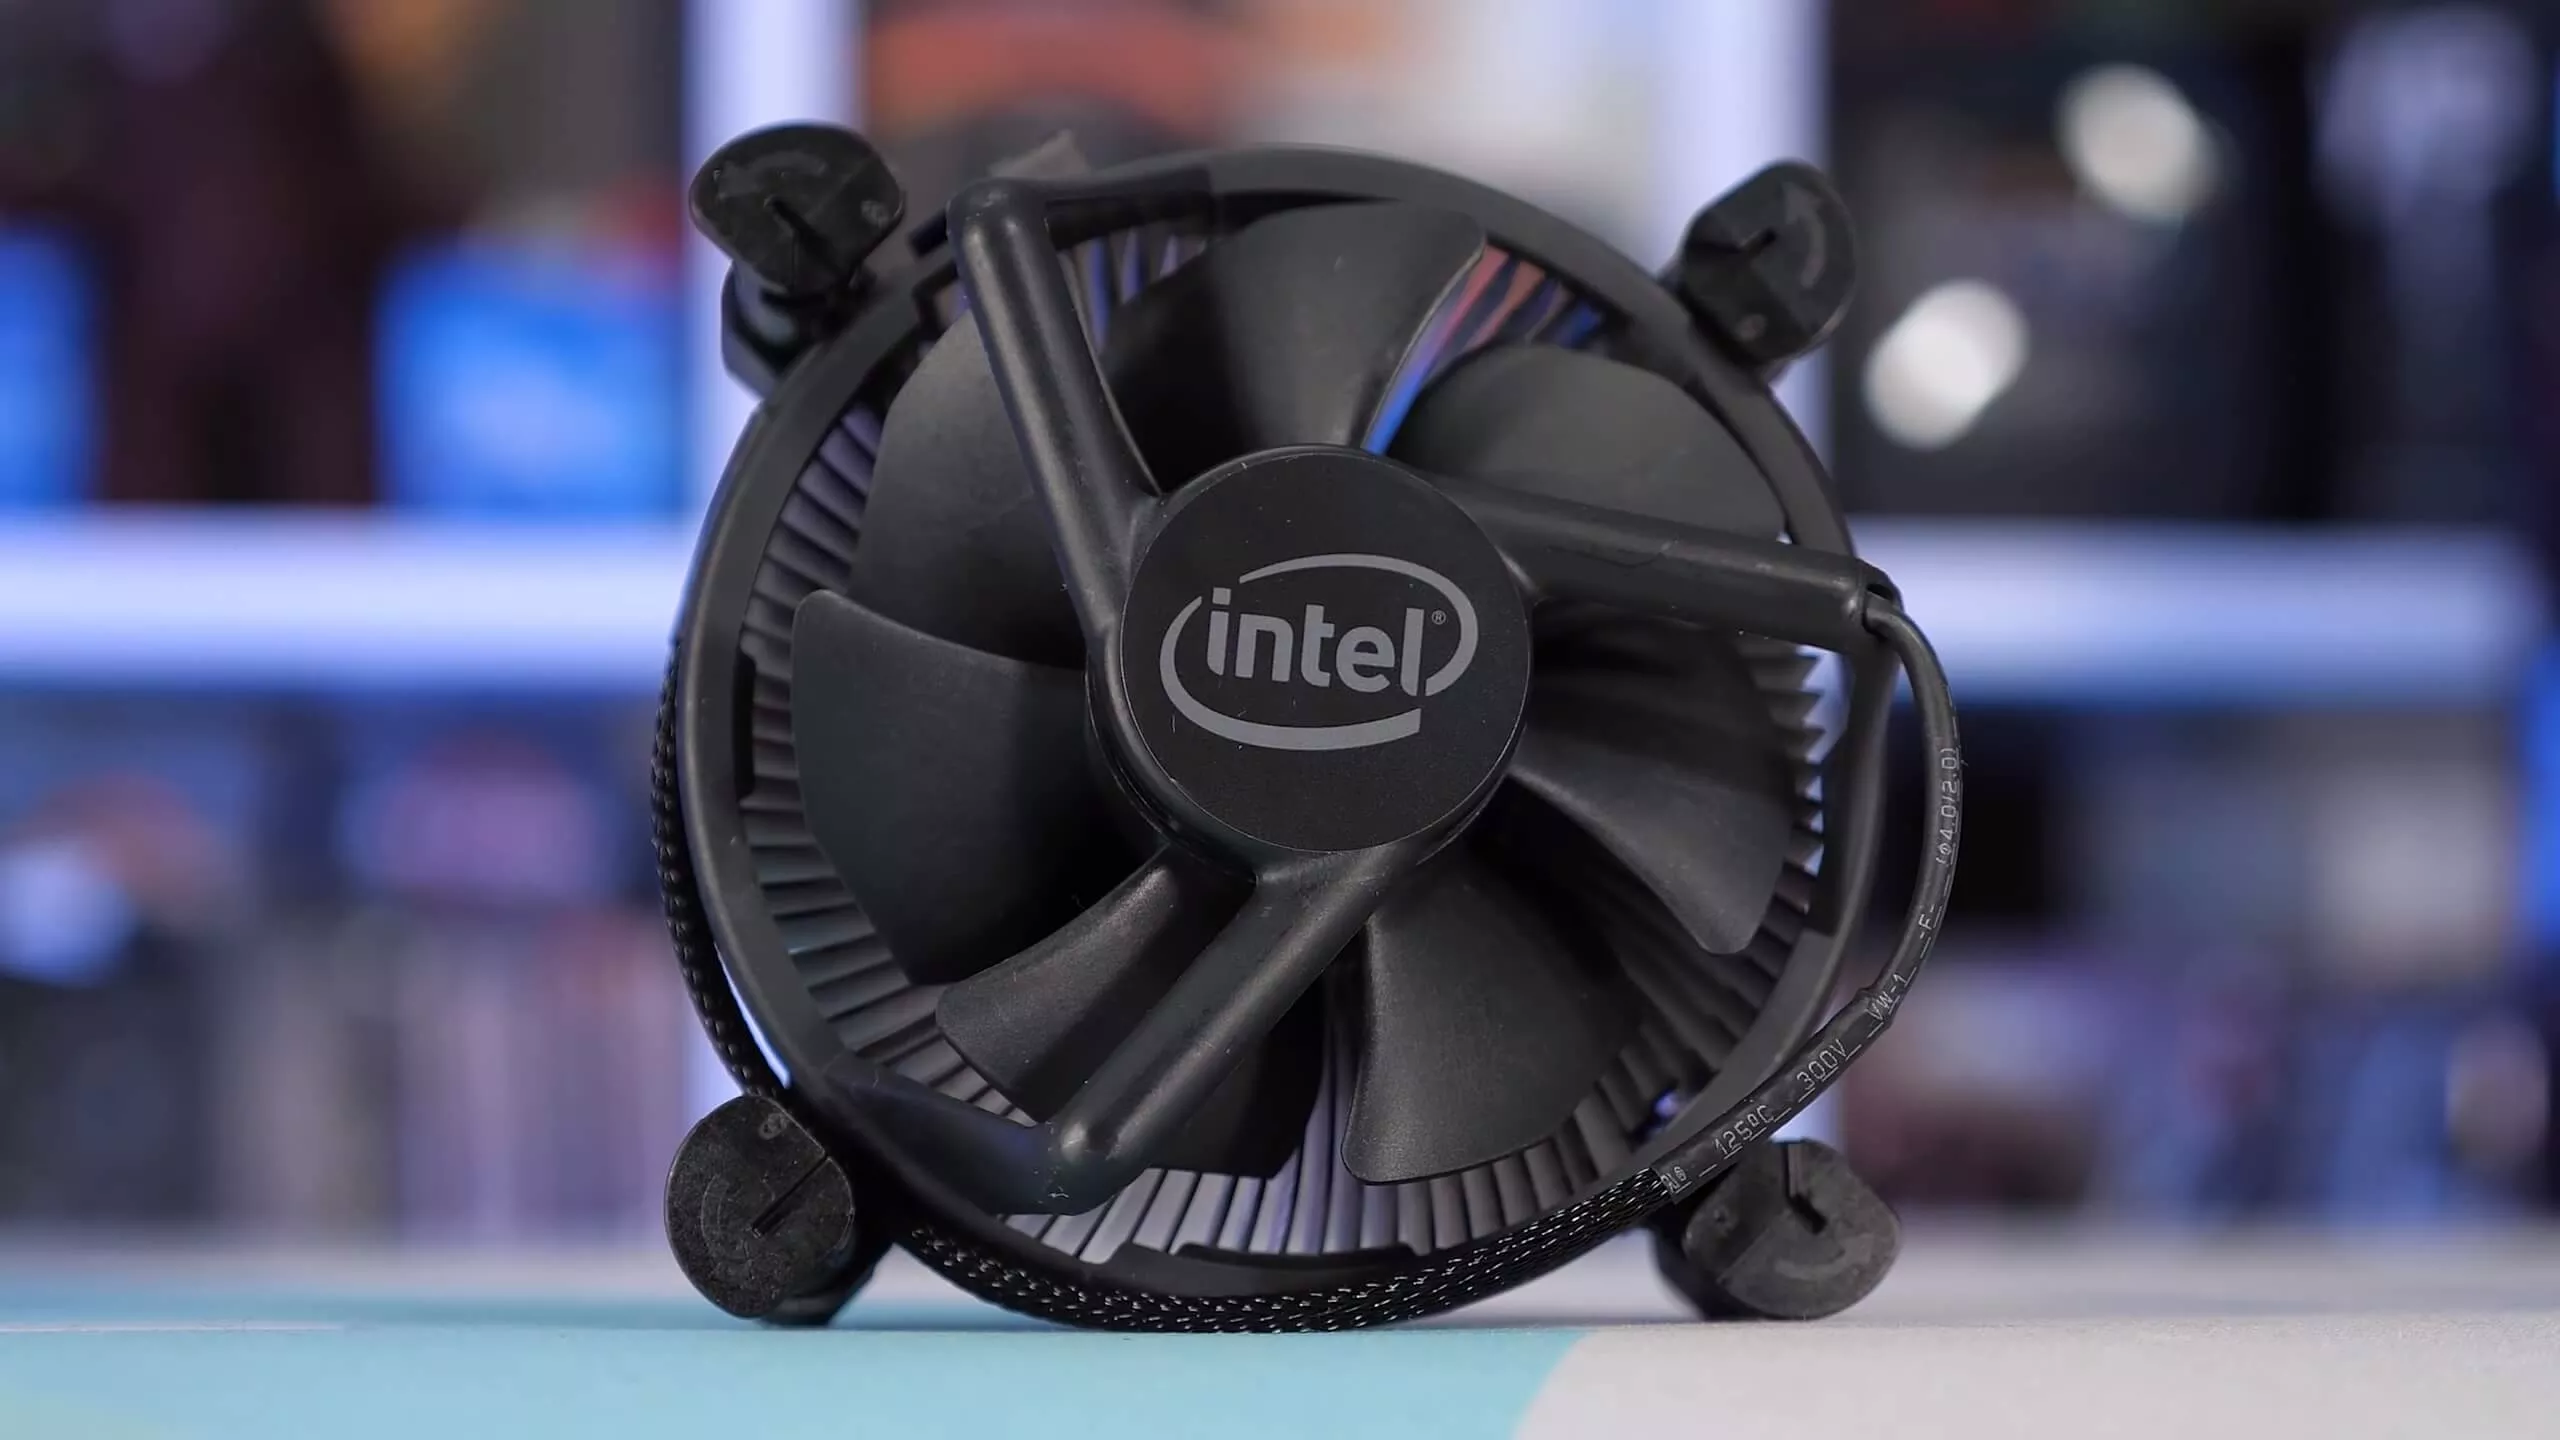 Intel is experimenting with new stock cooler designs for Alder Lake